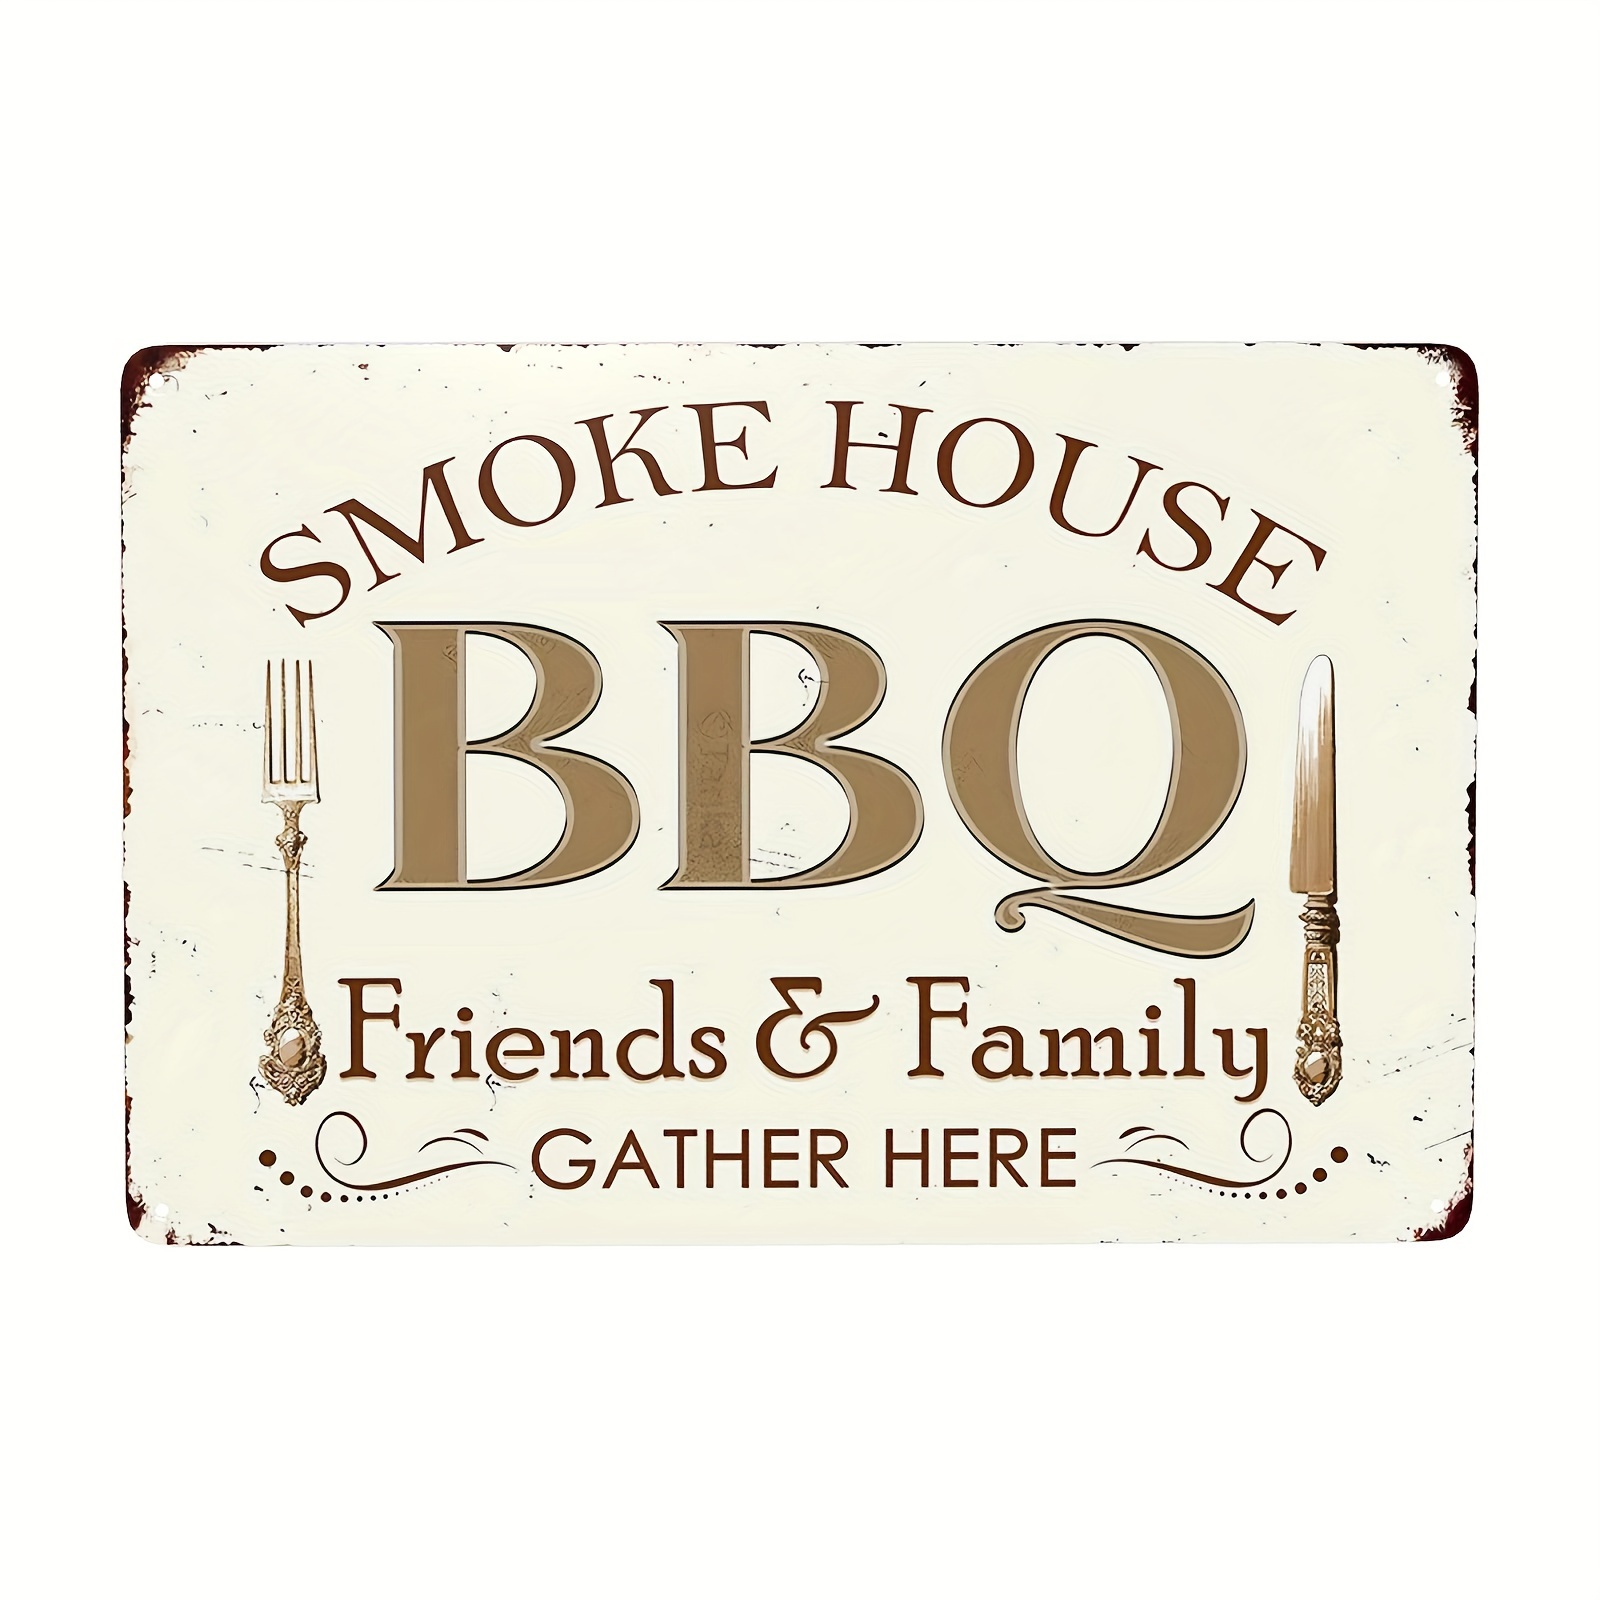 

1pc, Retro Aluminum Sign, Smoke House Bbq Friends And Family Gather Here Funny Retro Vintage Metal Wall Art Decor For Barbecue Bar Cafe Diner Kitchen Garage Man Cave Pub Pool Grill 12x8 Inch